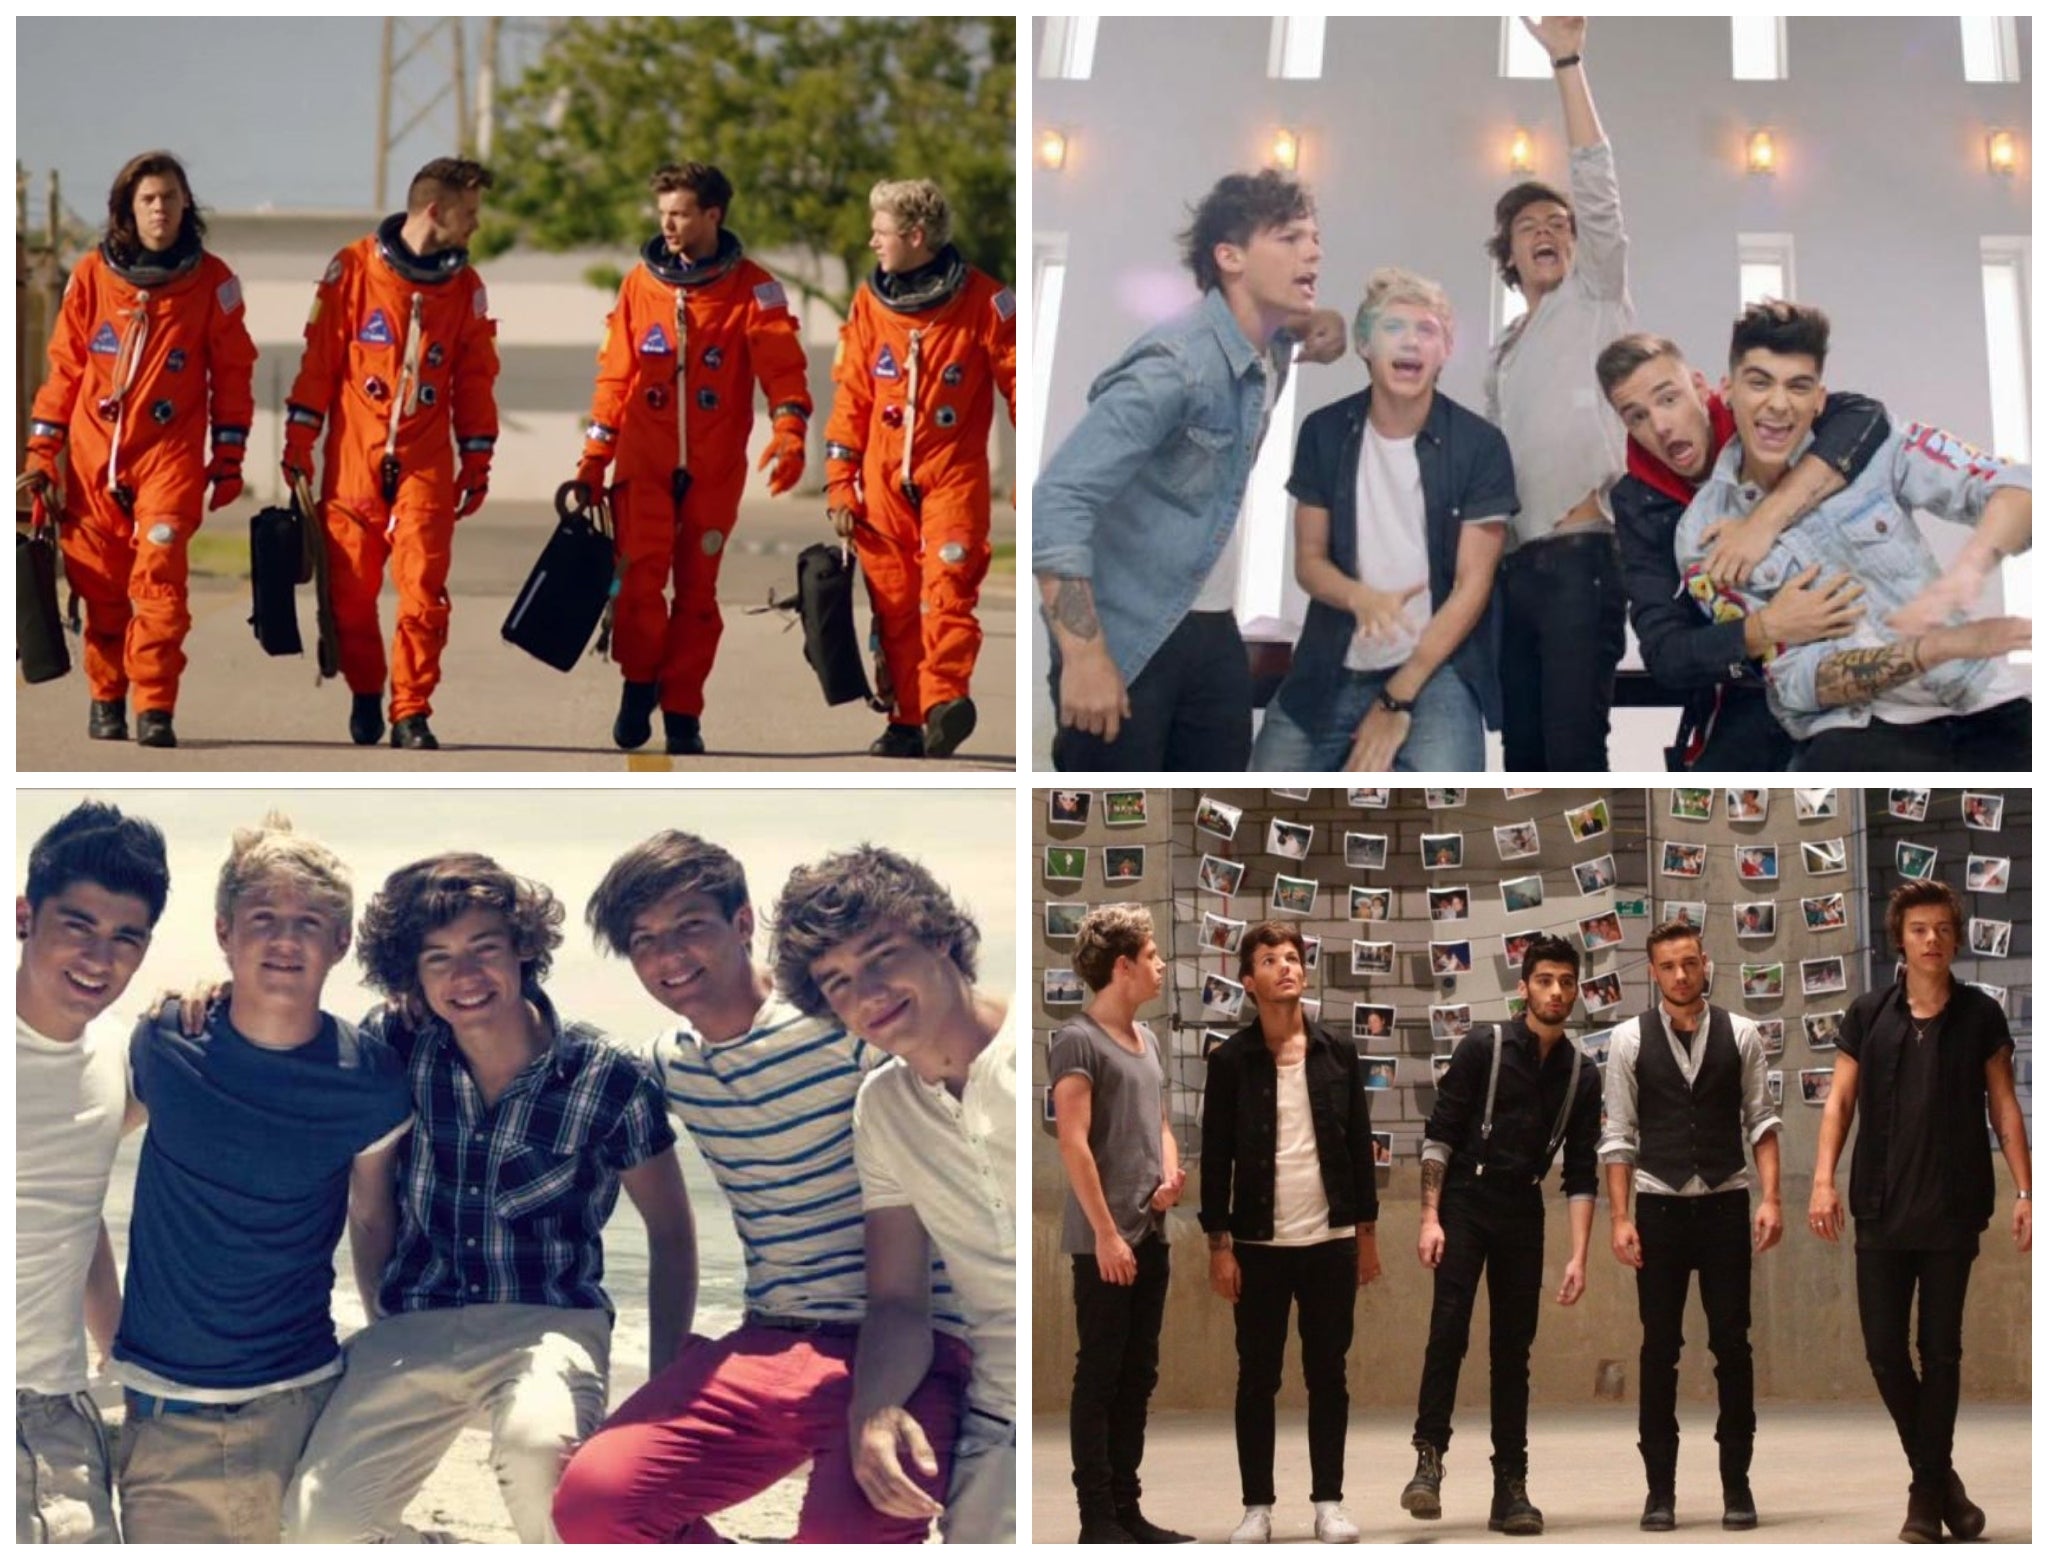 Louis Tomlinson EXCLUSIVE: Singer recreates One Direction with other band  members in music video